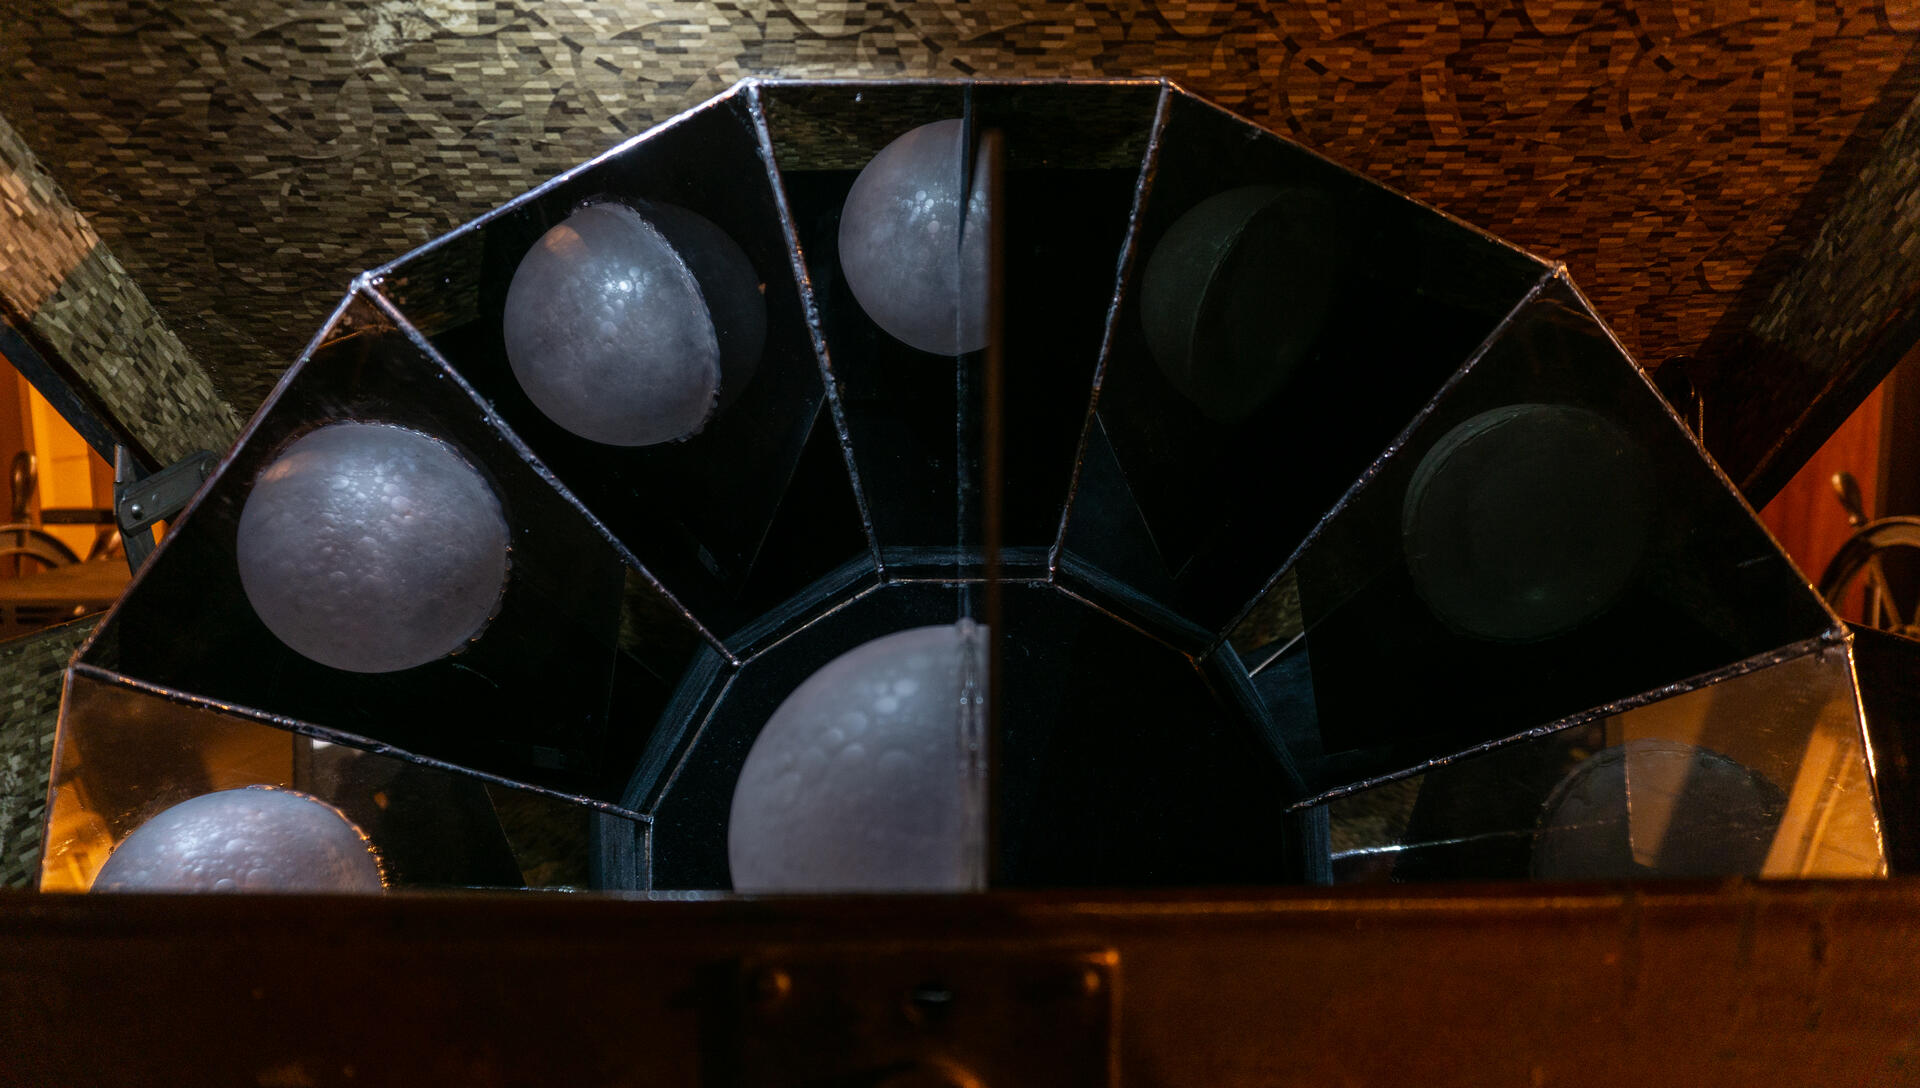 In an antique suitcase, a reflective device composed of multiple mirror structures is placed to showcase the various phases of the moon through a semi-circular glass moon at the center.